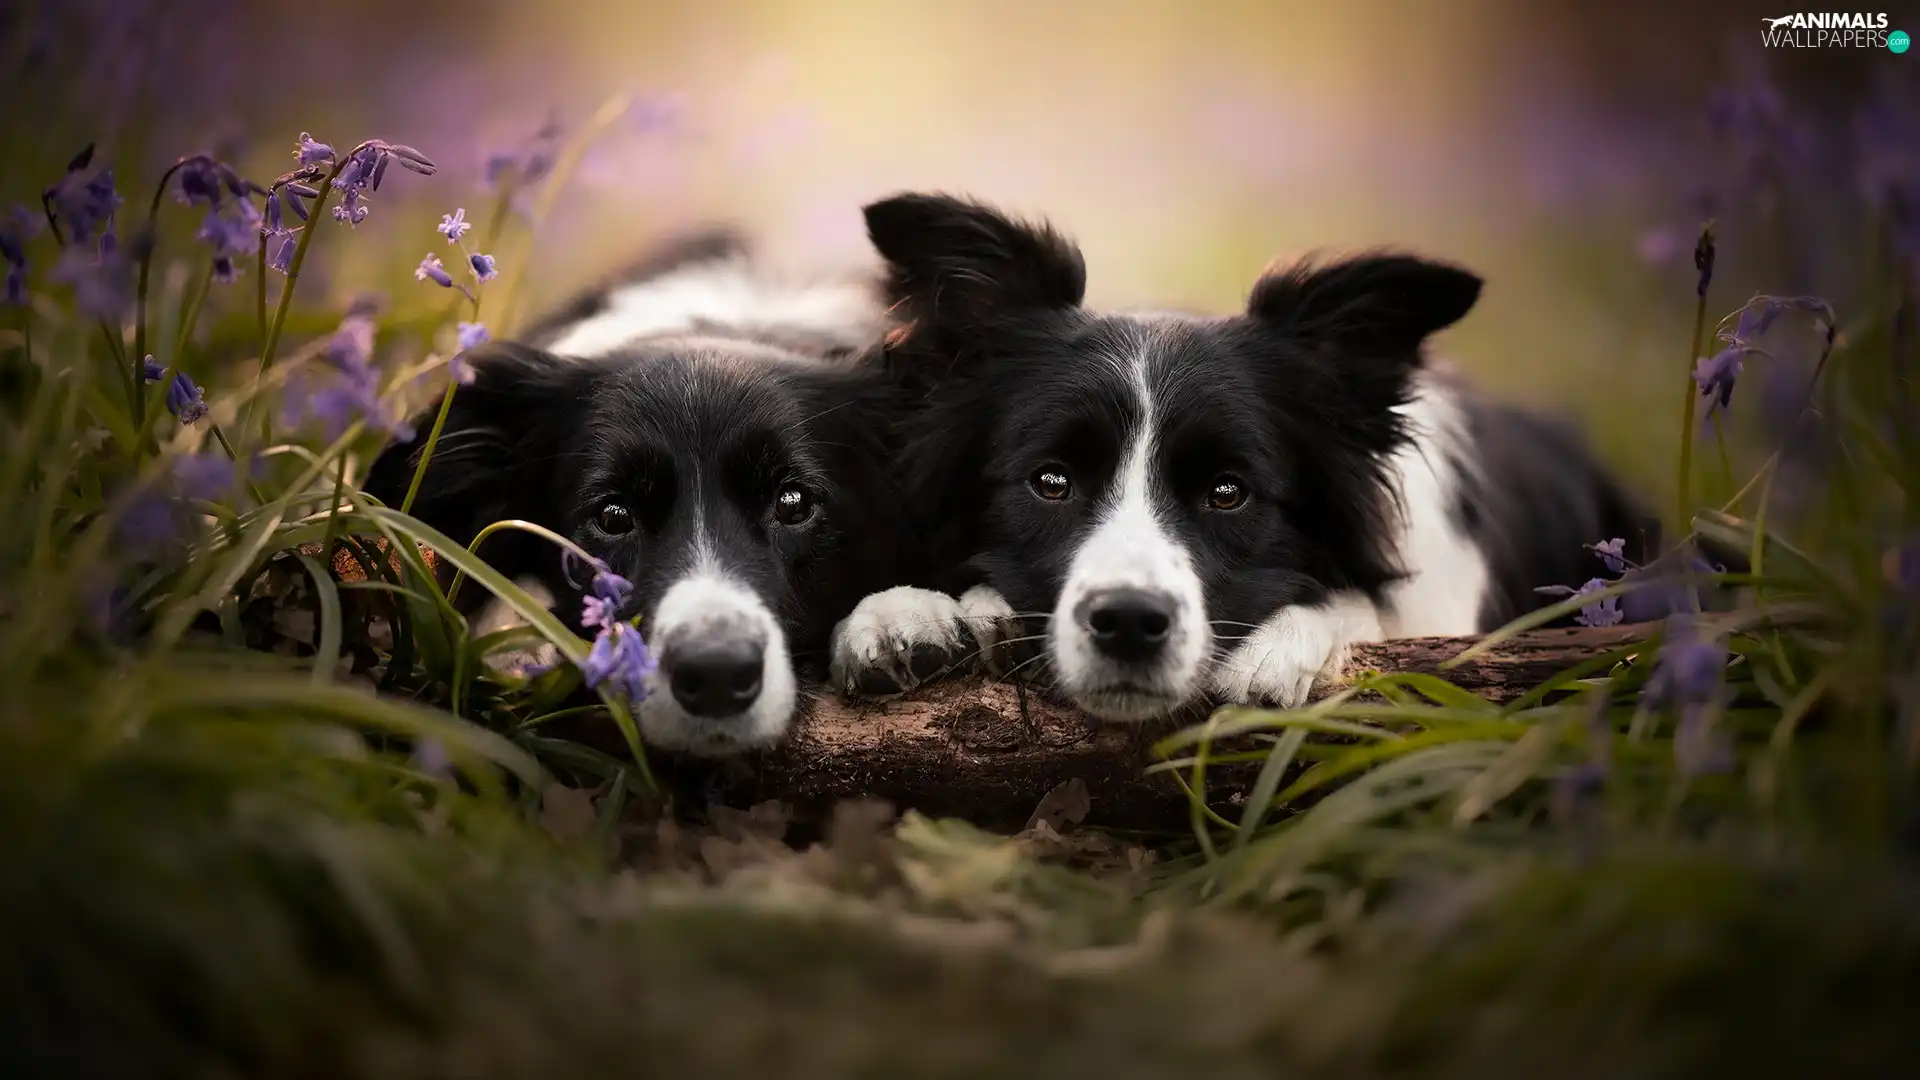 Two cars, Dogs, Border Collie, White-Black